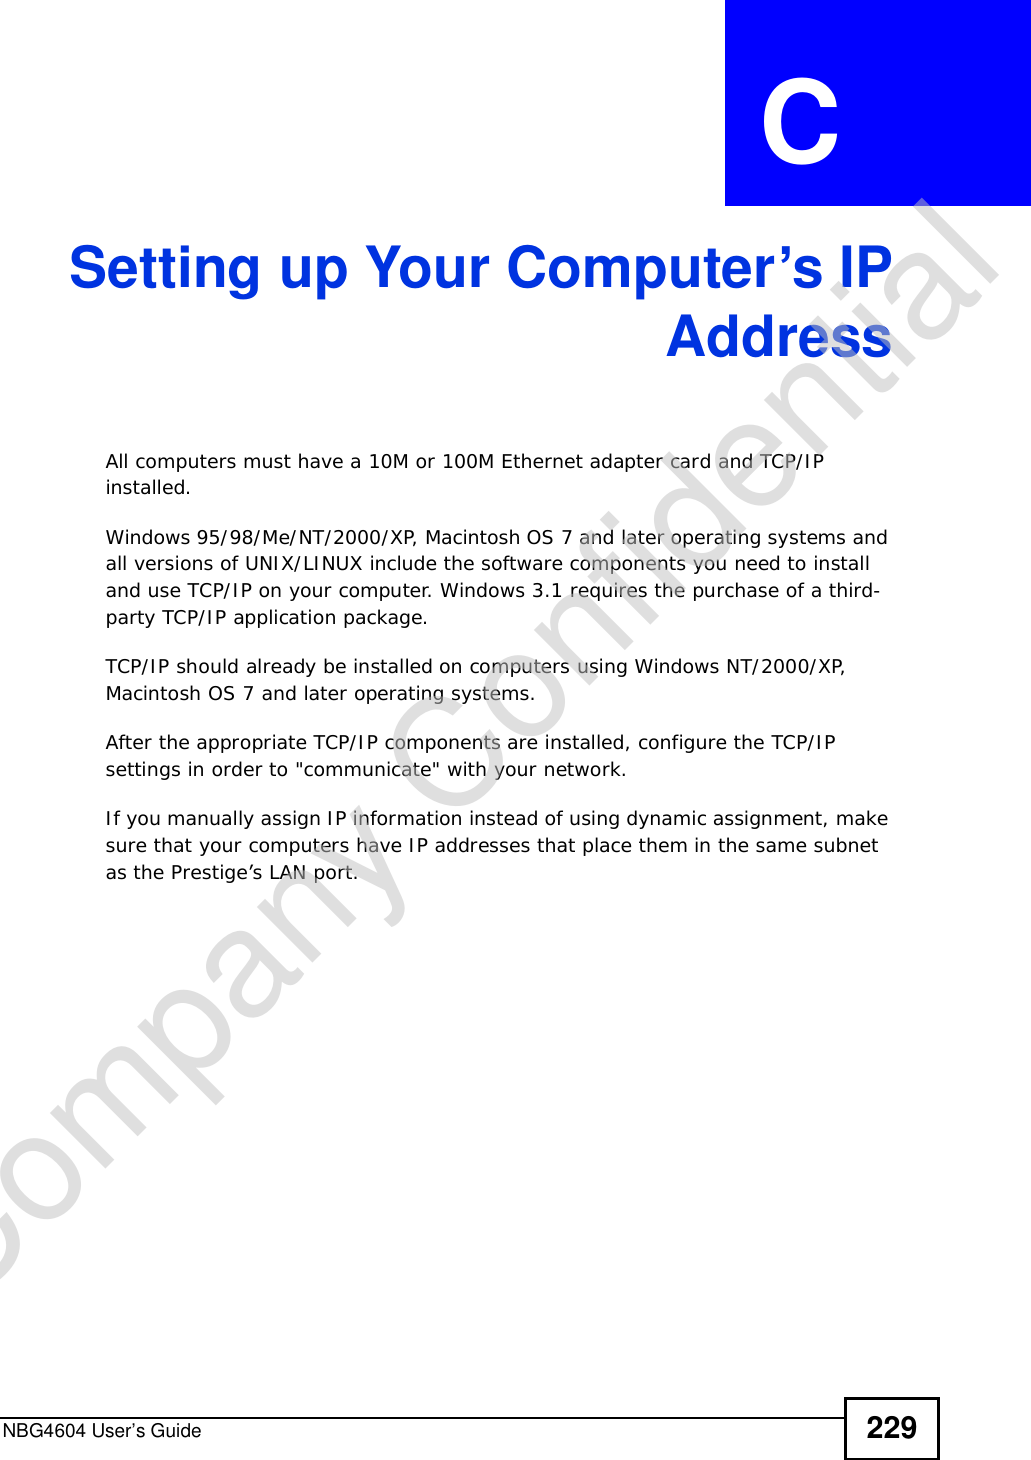 NBG4604 User’s Guide 229APPENDIX  C Setting up Your Computer’s IPAddressAll computers must have a 10M or 100M Ethernet adapter card and TCP/IP installed. Windows 95/98/Me/NT/2000/XP, Macintosh OS 7 and later operating systems and all versions of UNIX/LINUX include the software components you need to install and use TCP/IP on your computer. Windows 3.1 requires the purchase of a third-party TCP/IP application package.TCP/IP should already be installed on computers using Windows NT/2000/XP, Macintosh OS 7 and later operating systems.After the appropriate TCP/IP components are installed, configure the TCP/IP settings in order to &quot;communicate&quot; with your network. If you manually assign IP information instead of using dynamic assignment, make sure that your computers have IP addresses that place them in the same subnet as the Prestige’s LAN port.Company Confidential